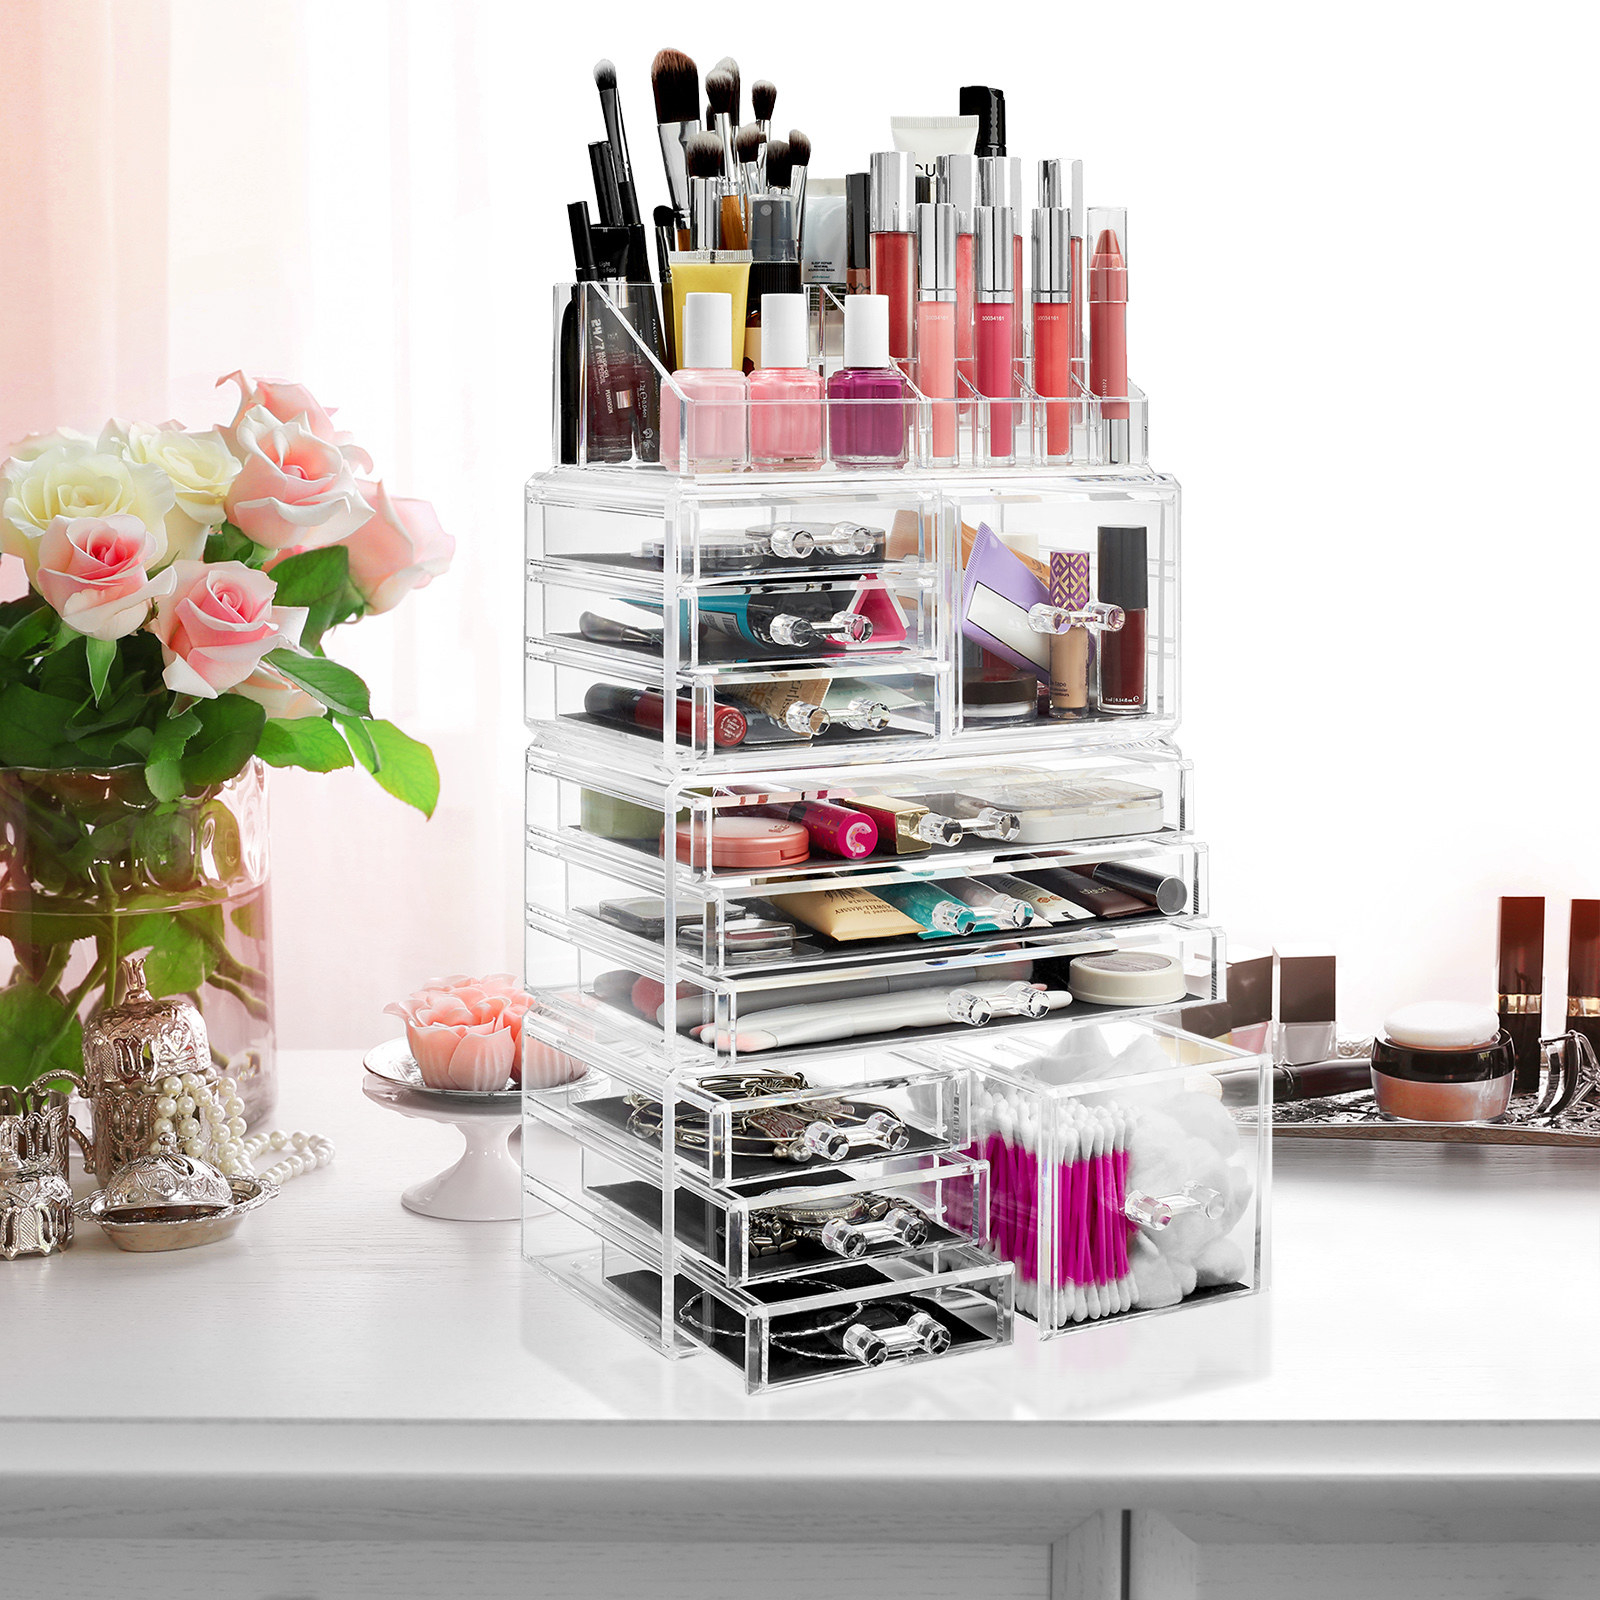 the organizer with makeup and toiletries inside